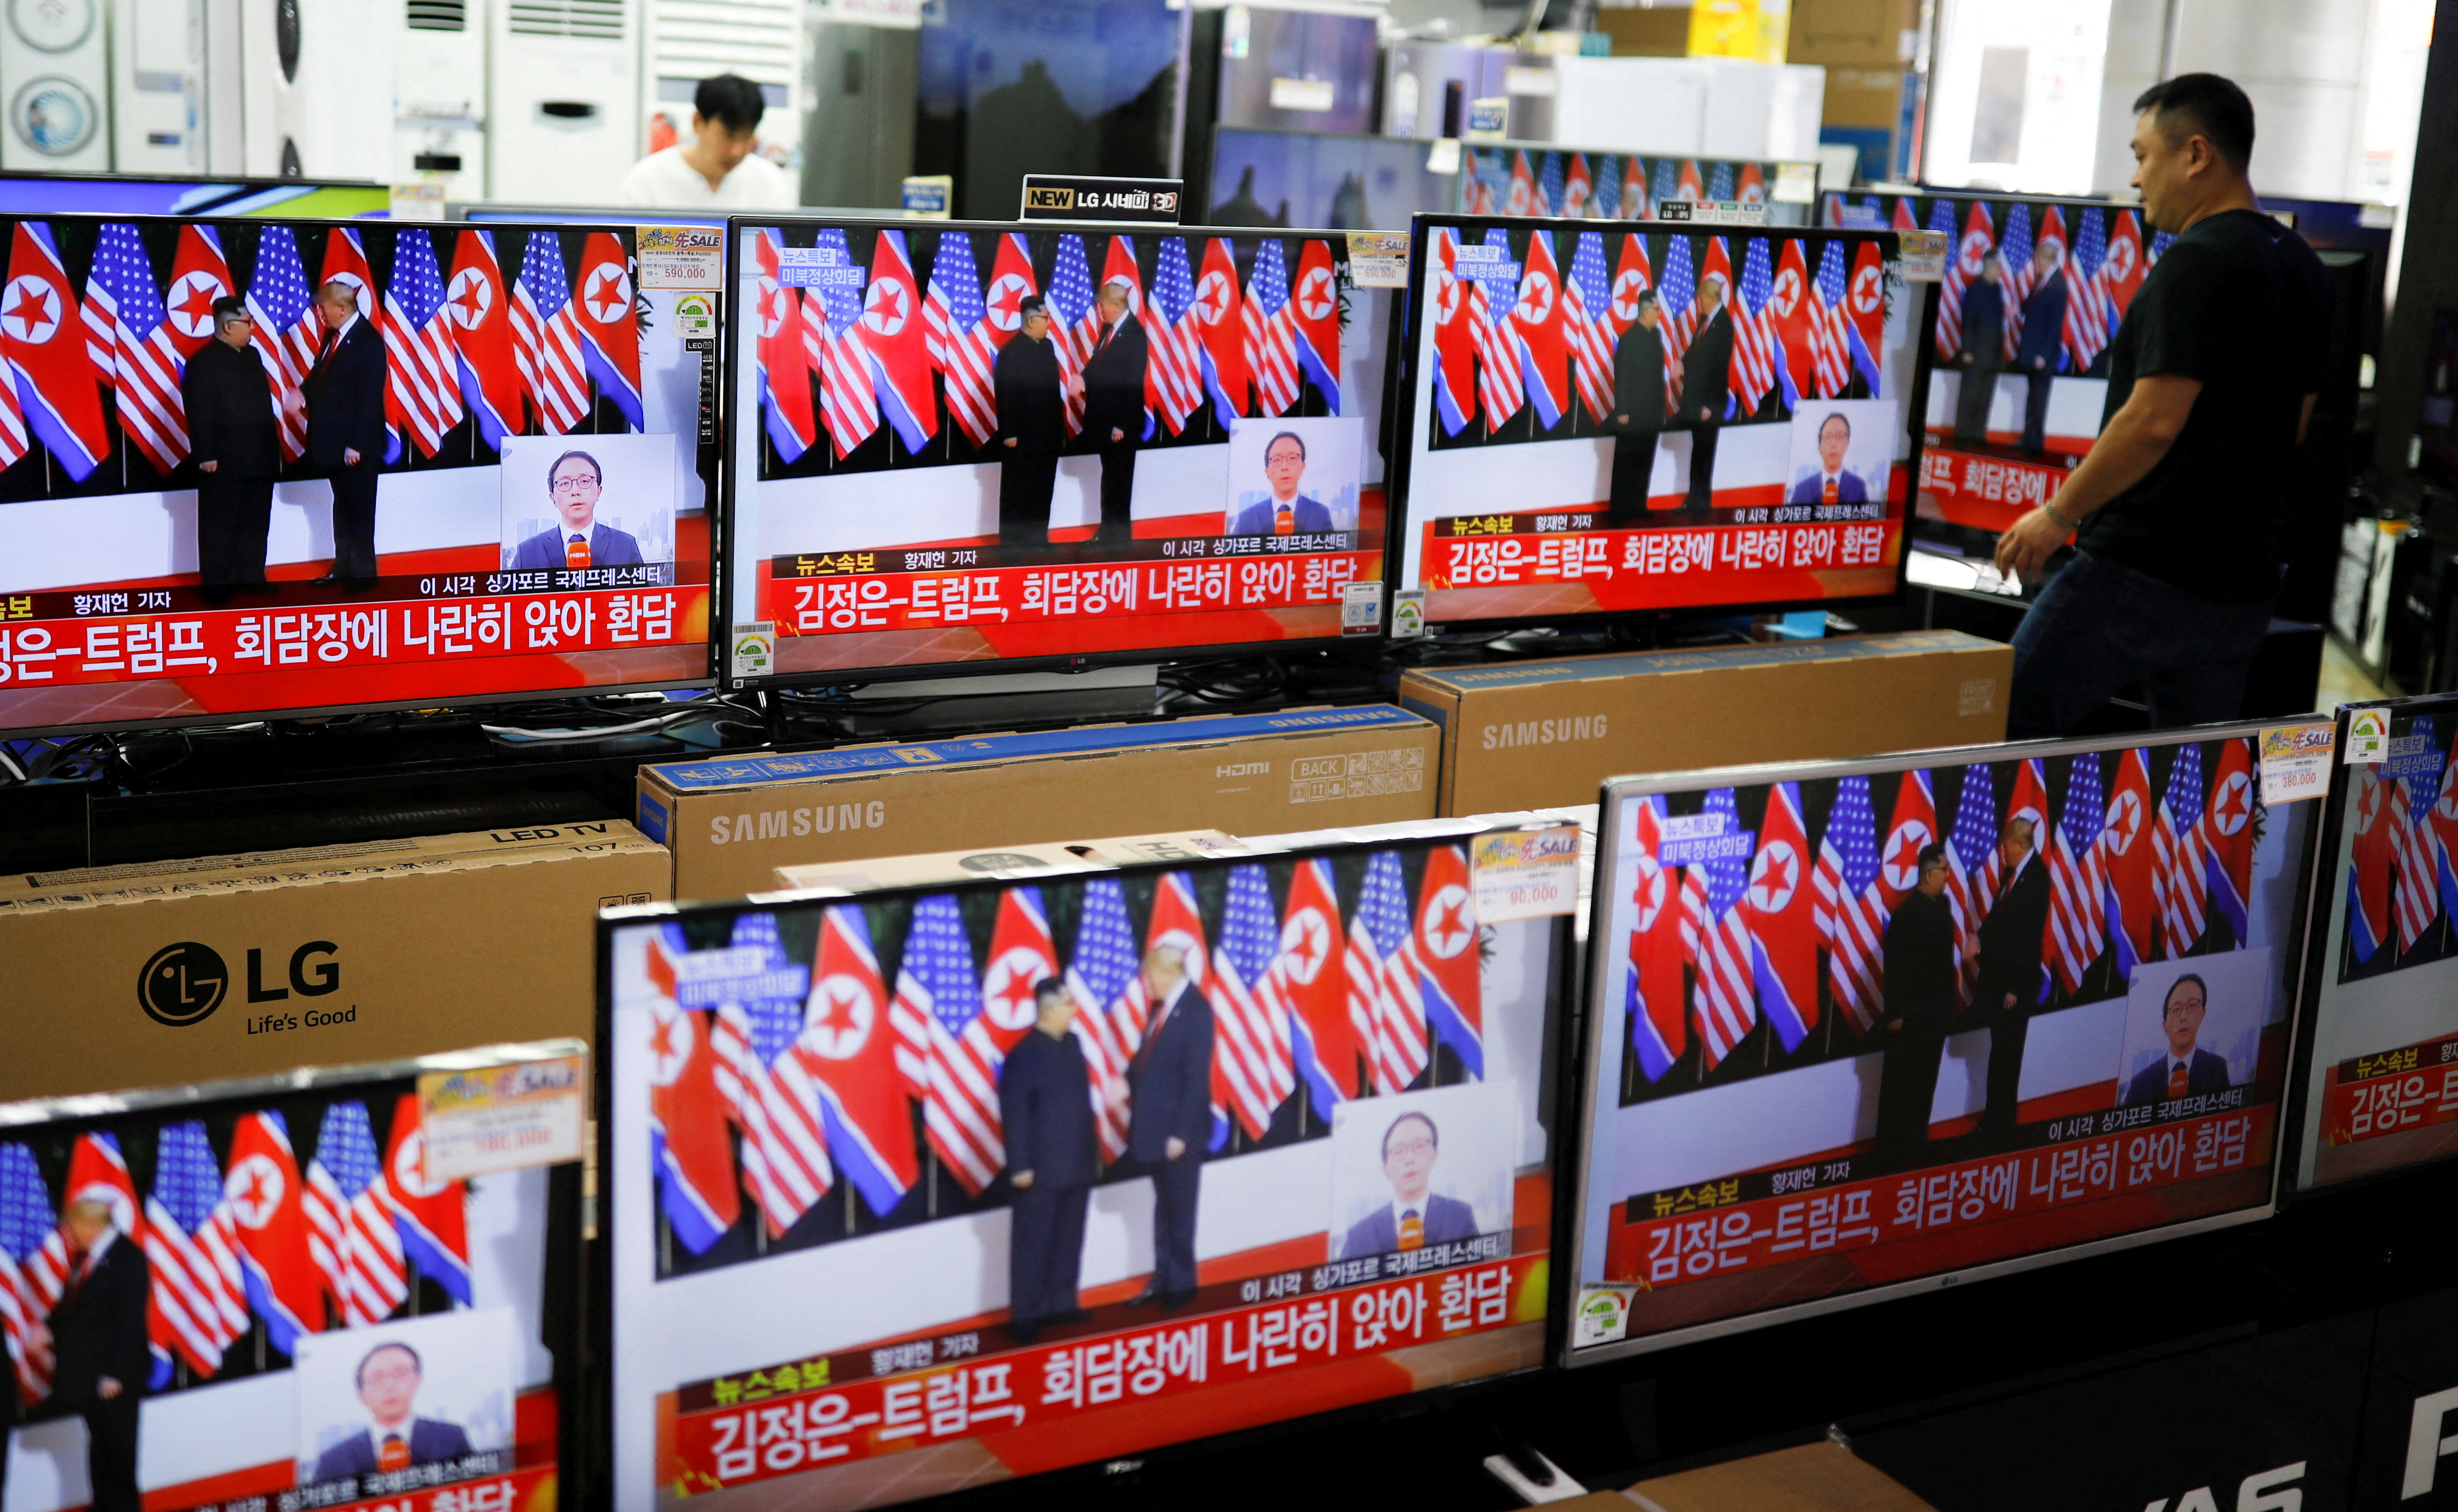 A shopkeeper walks past a set of TVs broadcasting a news report on summit between the U.S. and North Korea, in Seoul